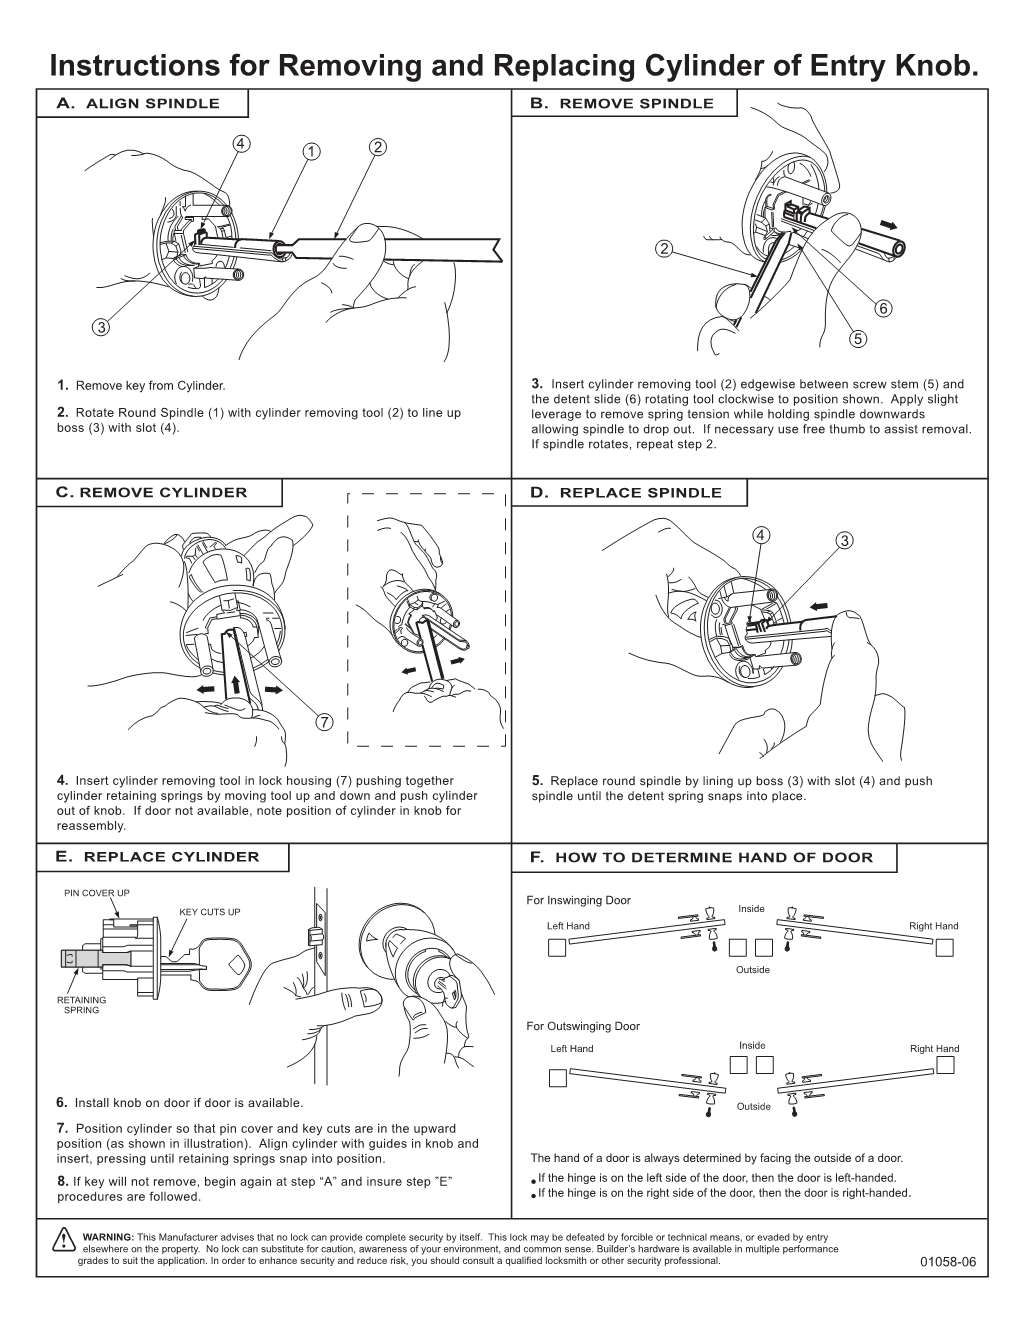 Instructions for Removing and Replacing Cylinder of Entry Knob